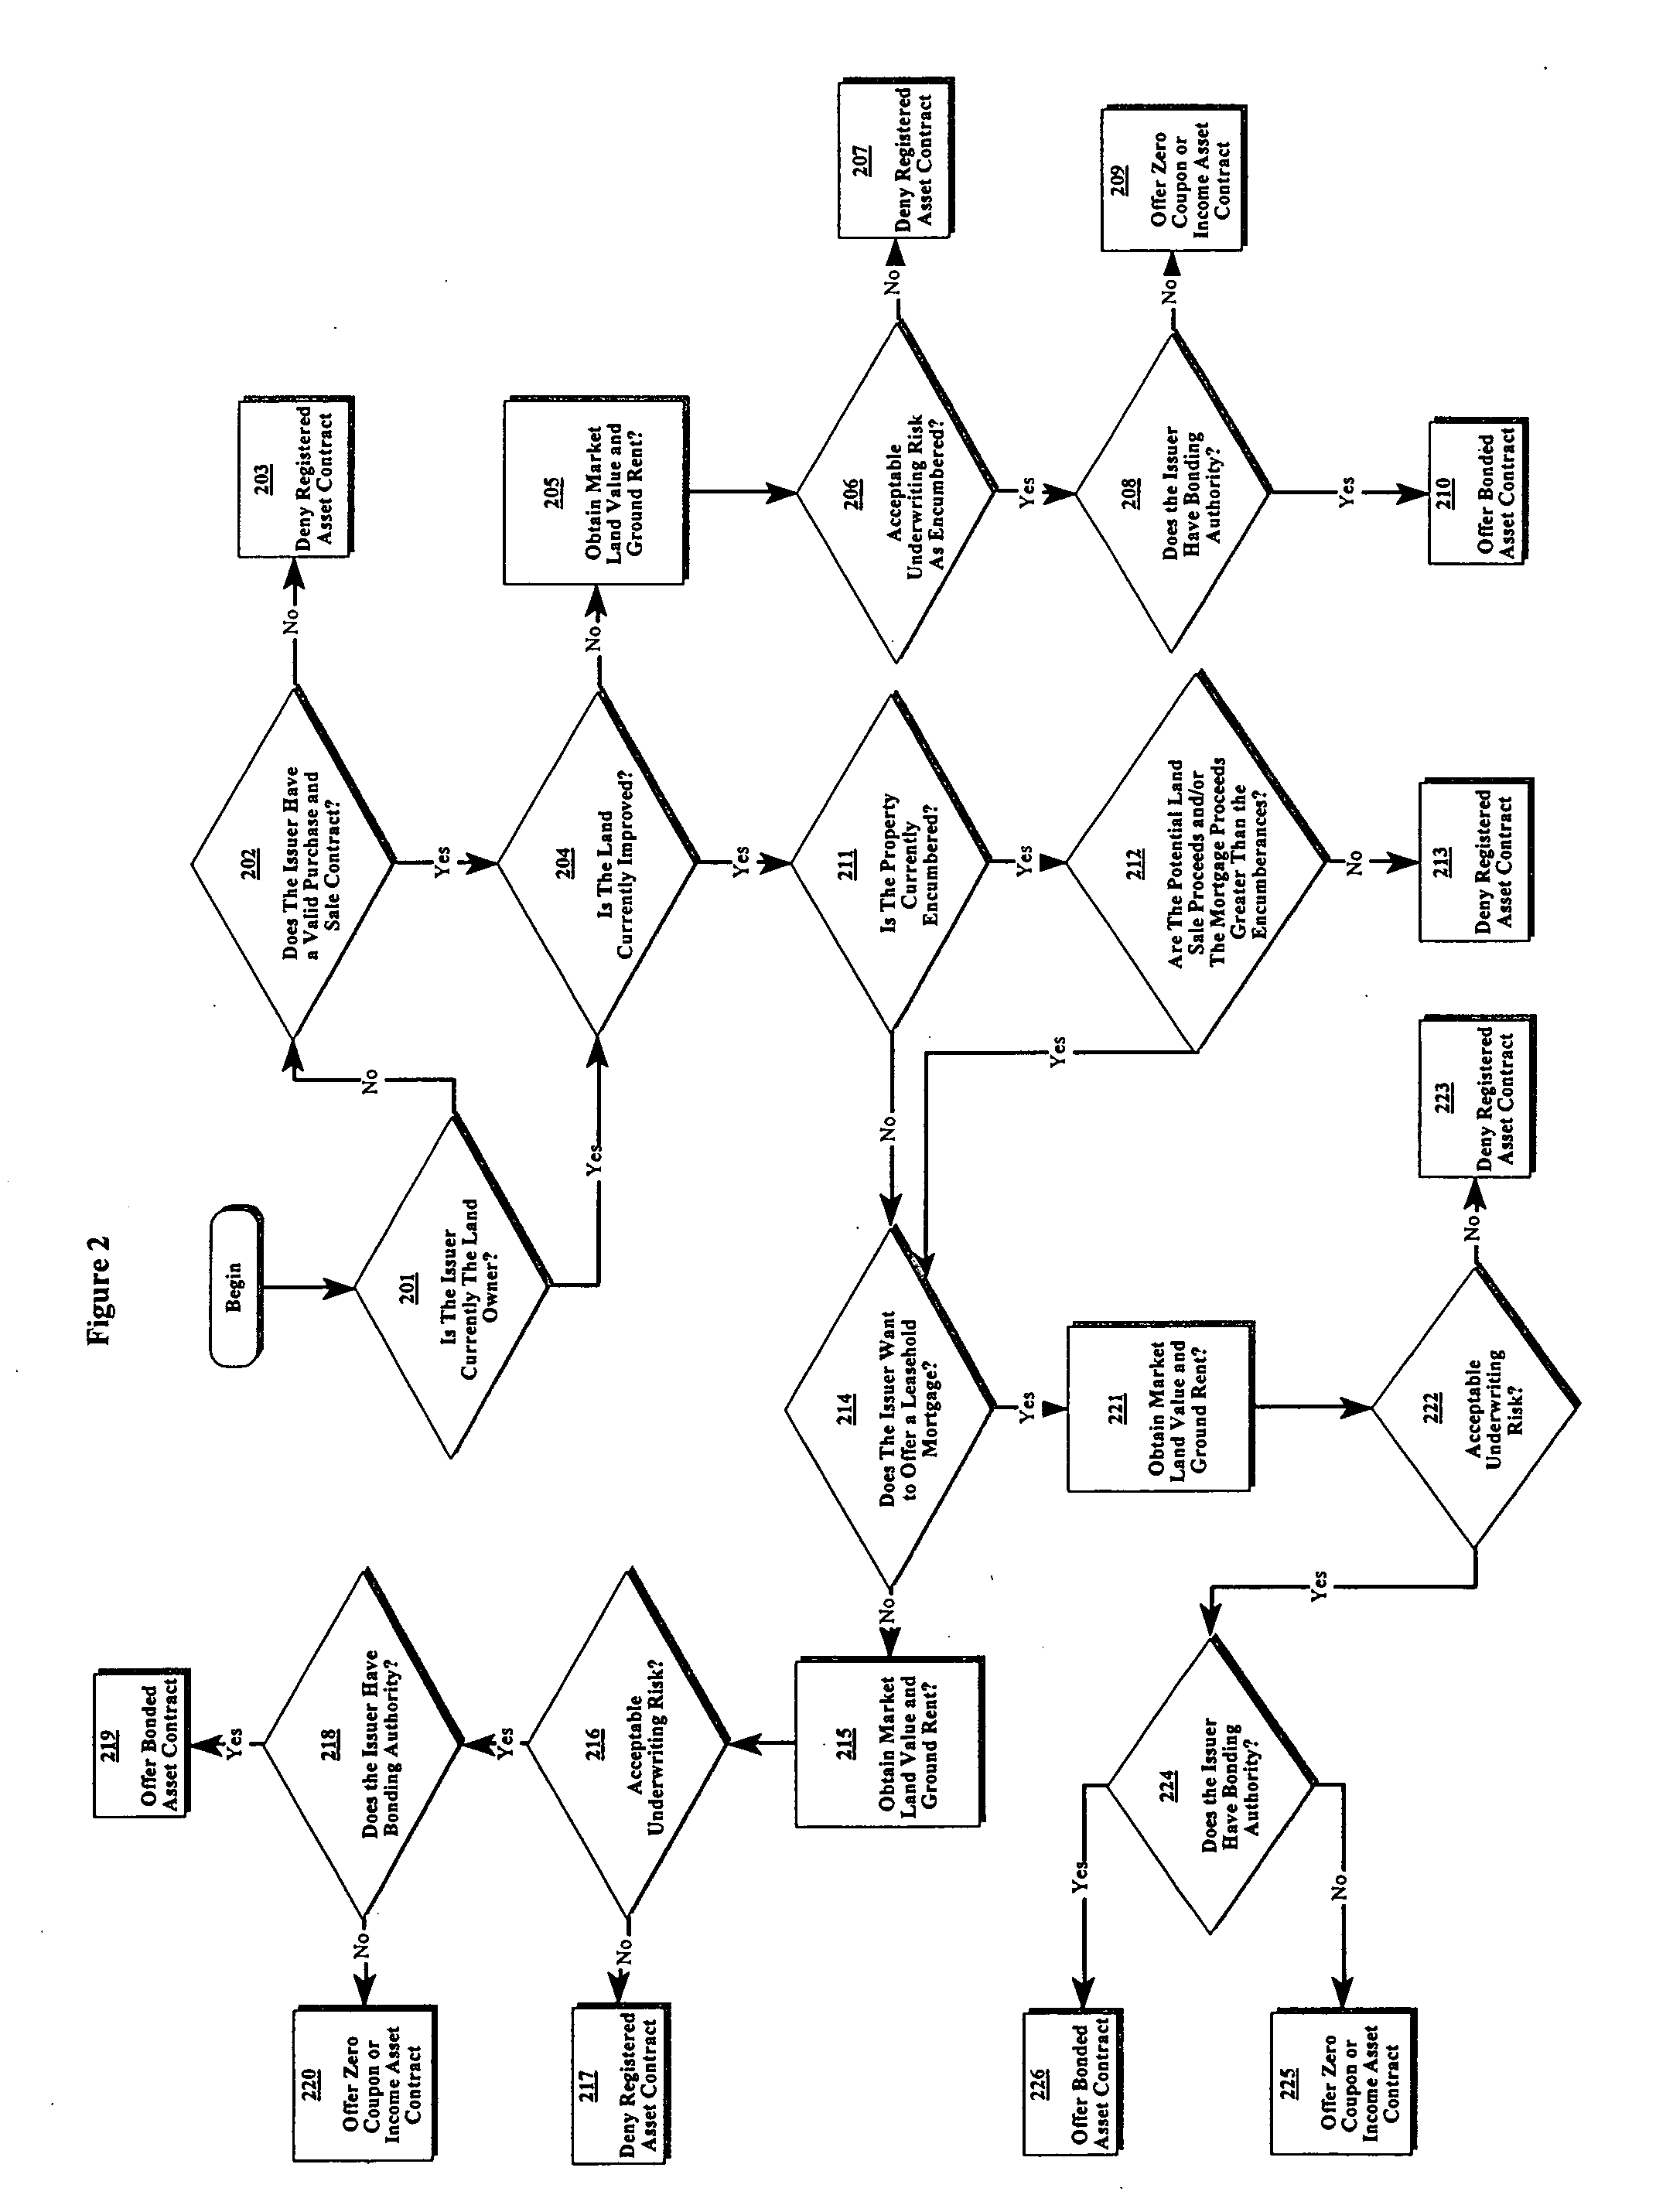 System and method for creating electronic real estate registration